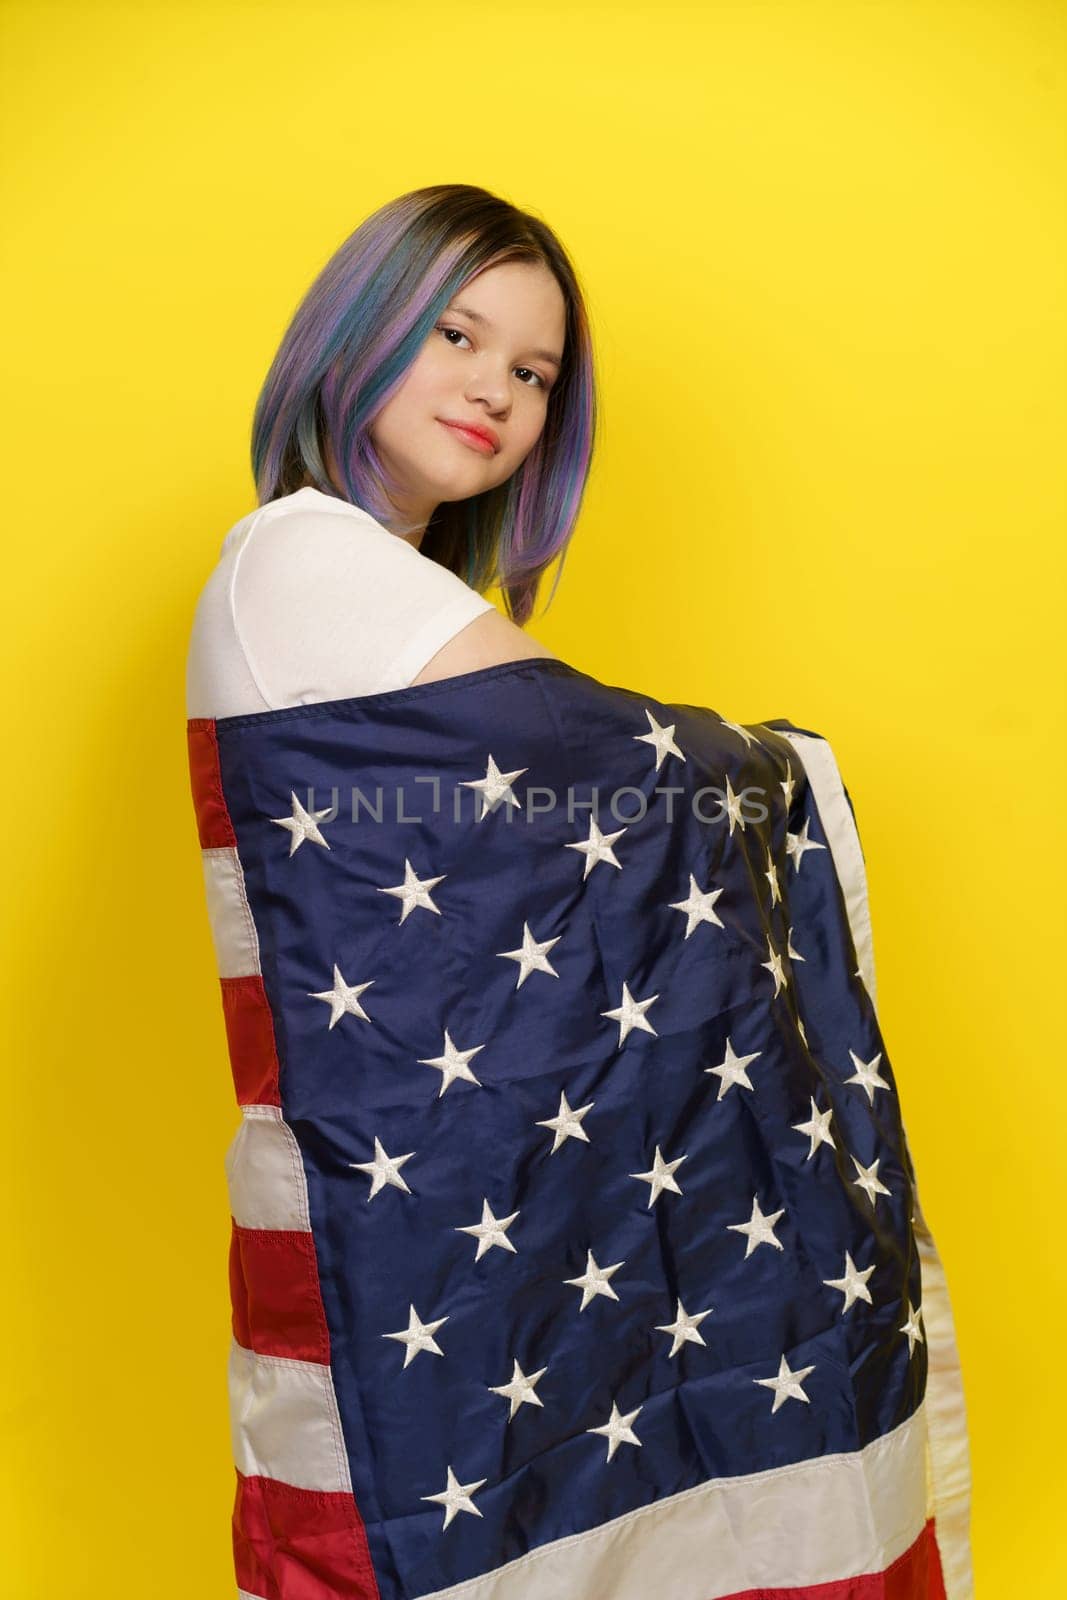 Proud Citizen With Multicolored Hair Poses For Camera In Studio, Wrapped In American Flag On Yellow Background. Patriotism, Pride, And Celebration Of Cultural Diversity. Proud American Teenager. by LipikStockMedia